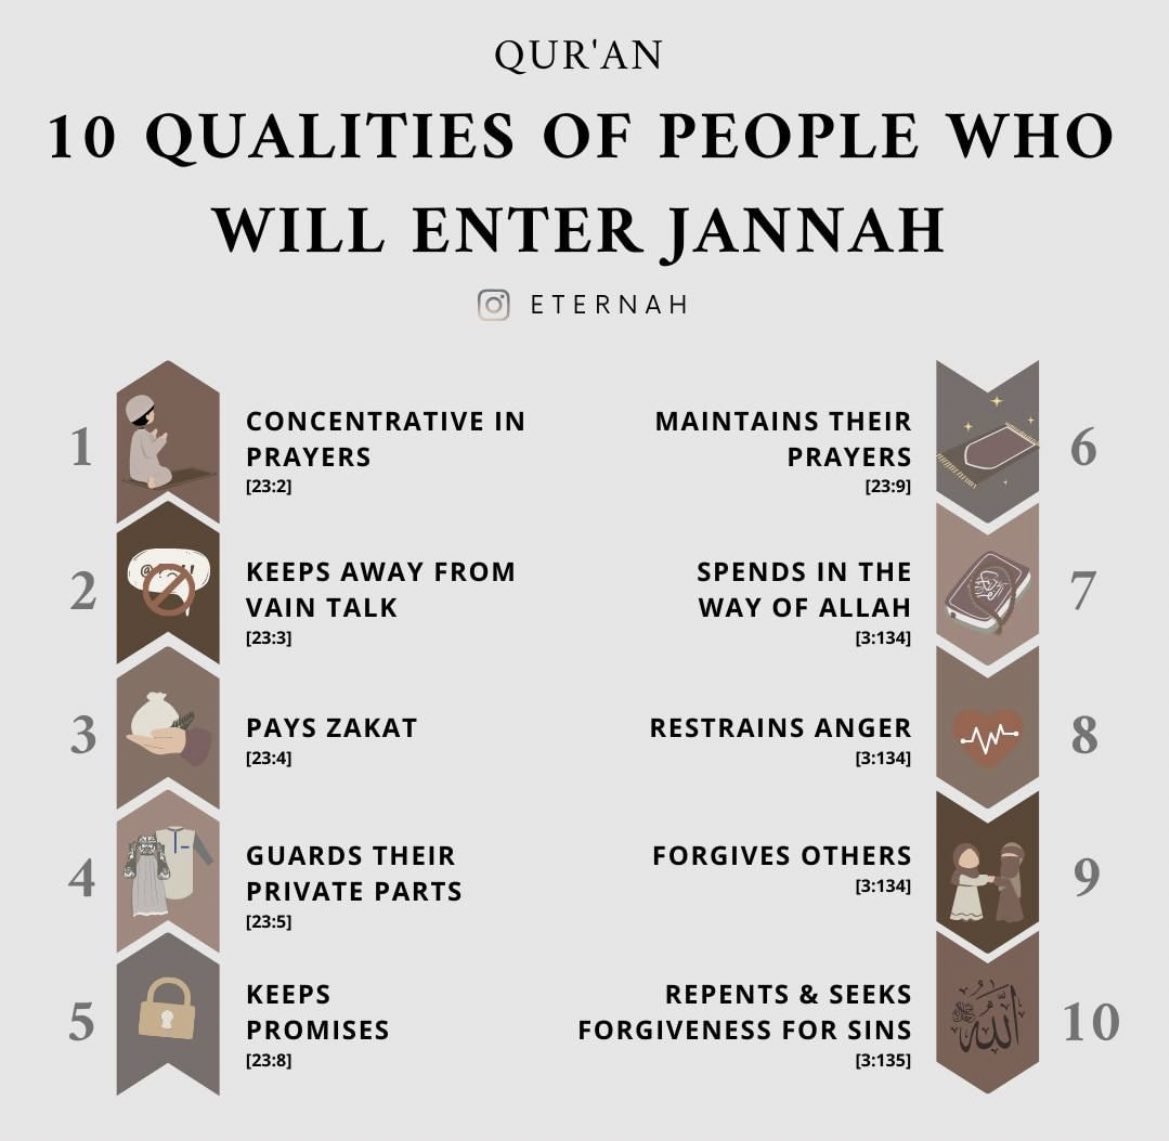 May Allah SWT allow us to gain all these characteristics. Amin 🤲🏼🤍